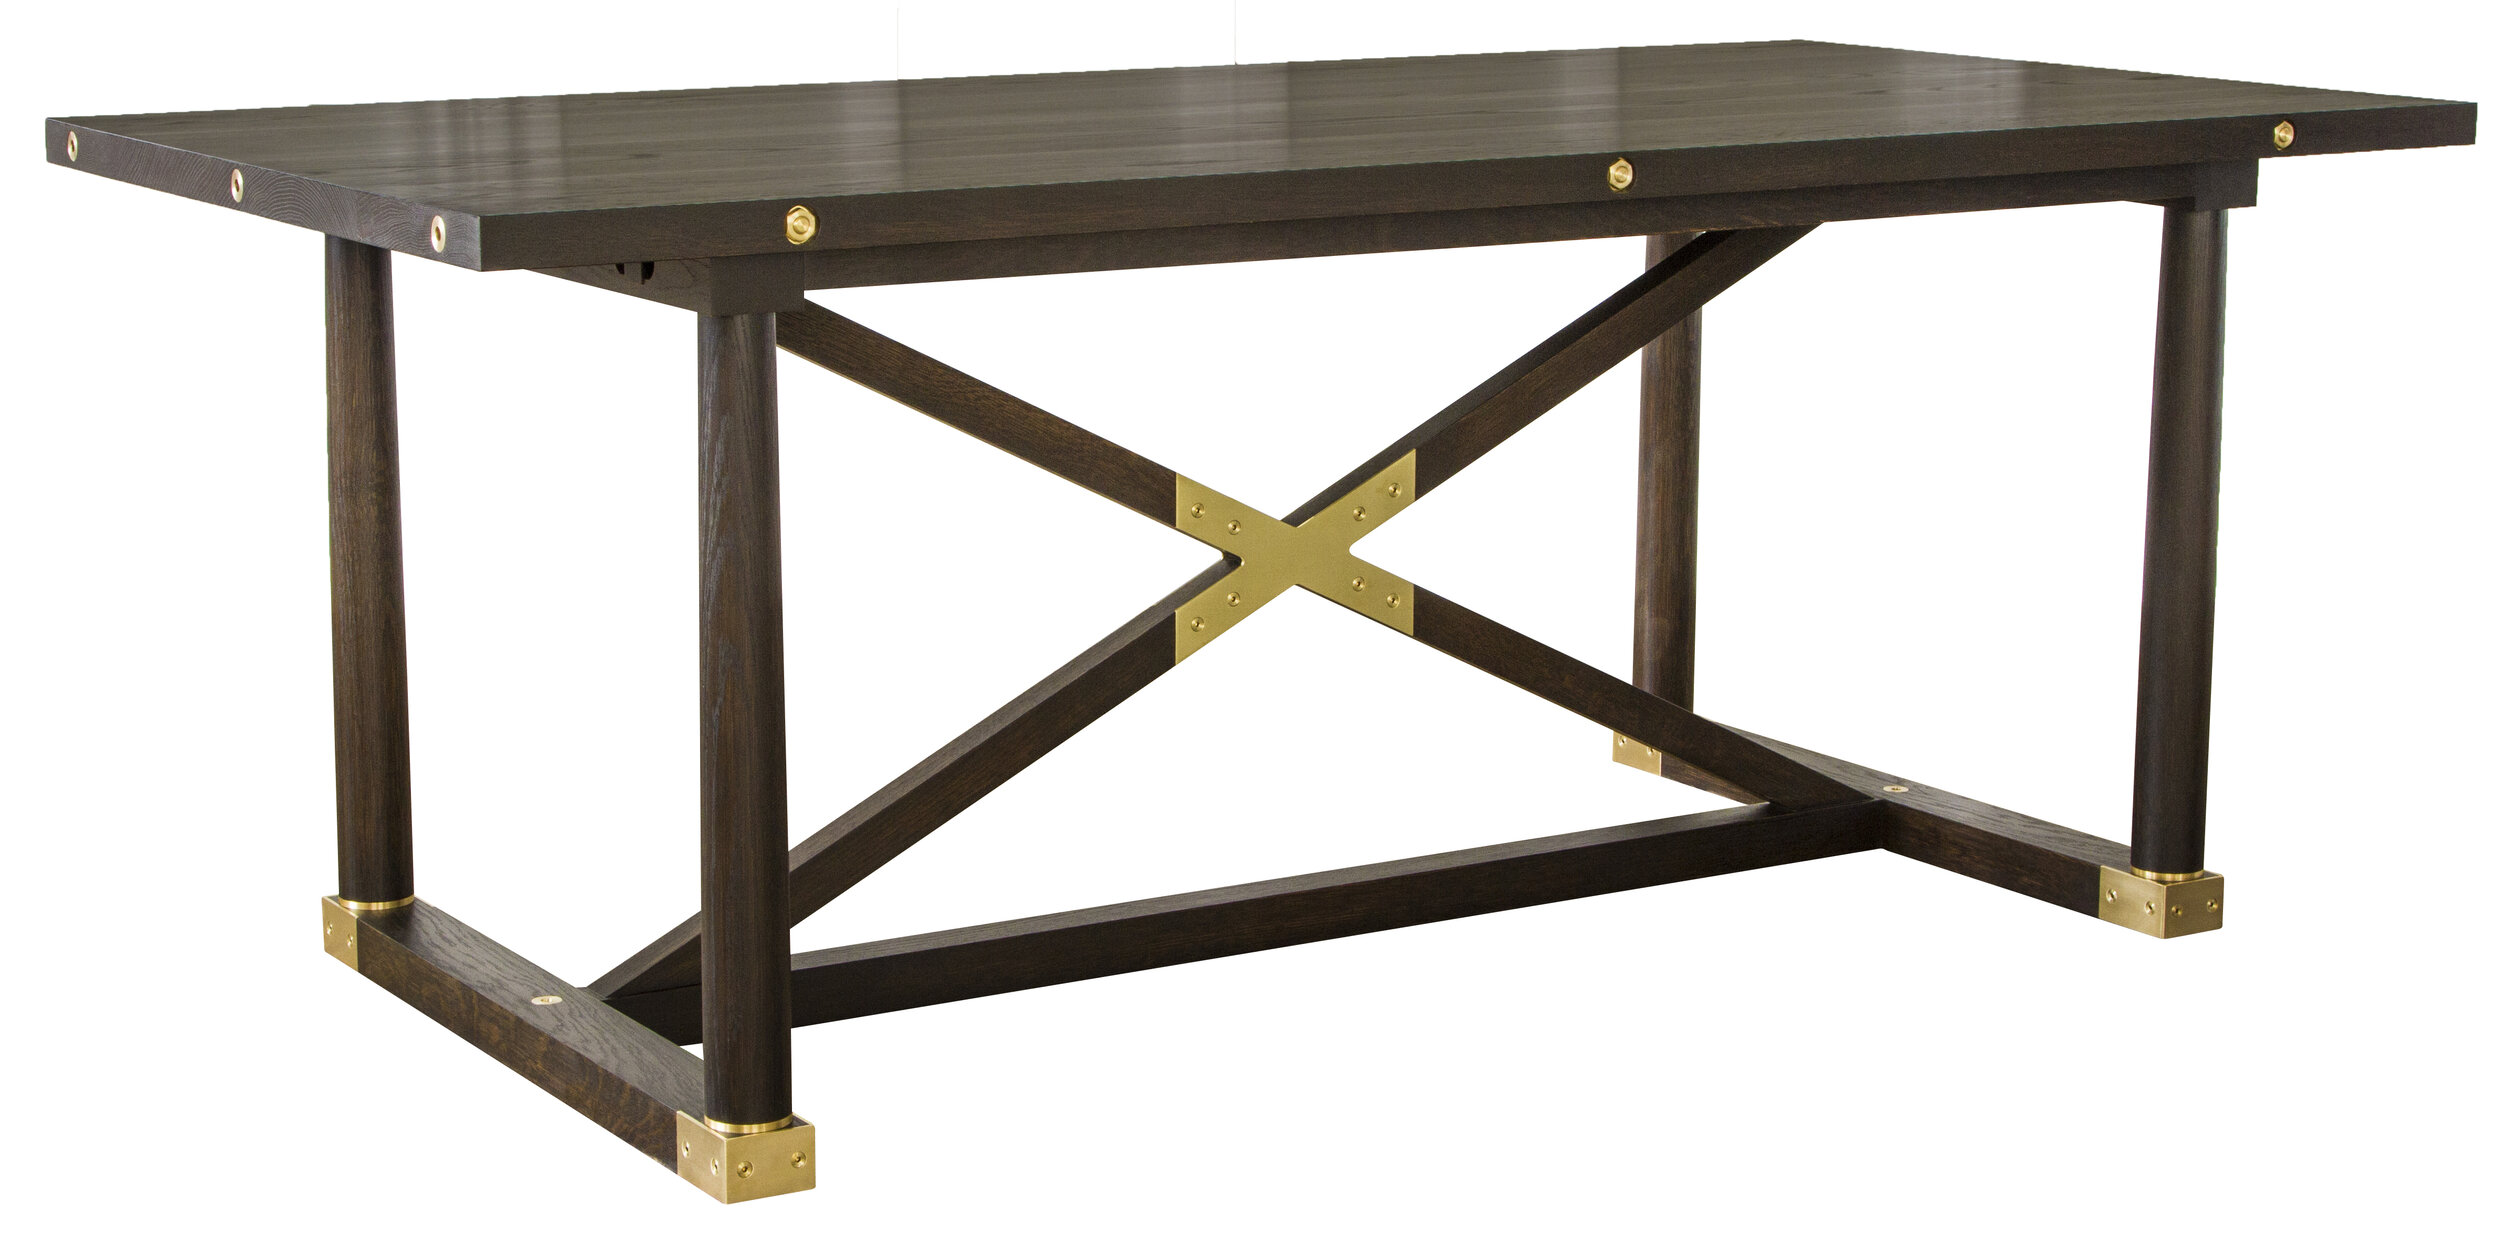 Carden Table without leaf extensions removed